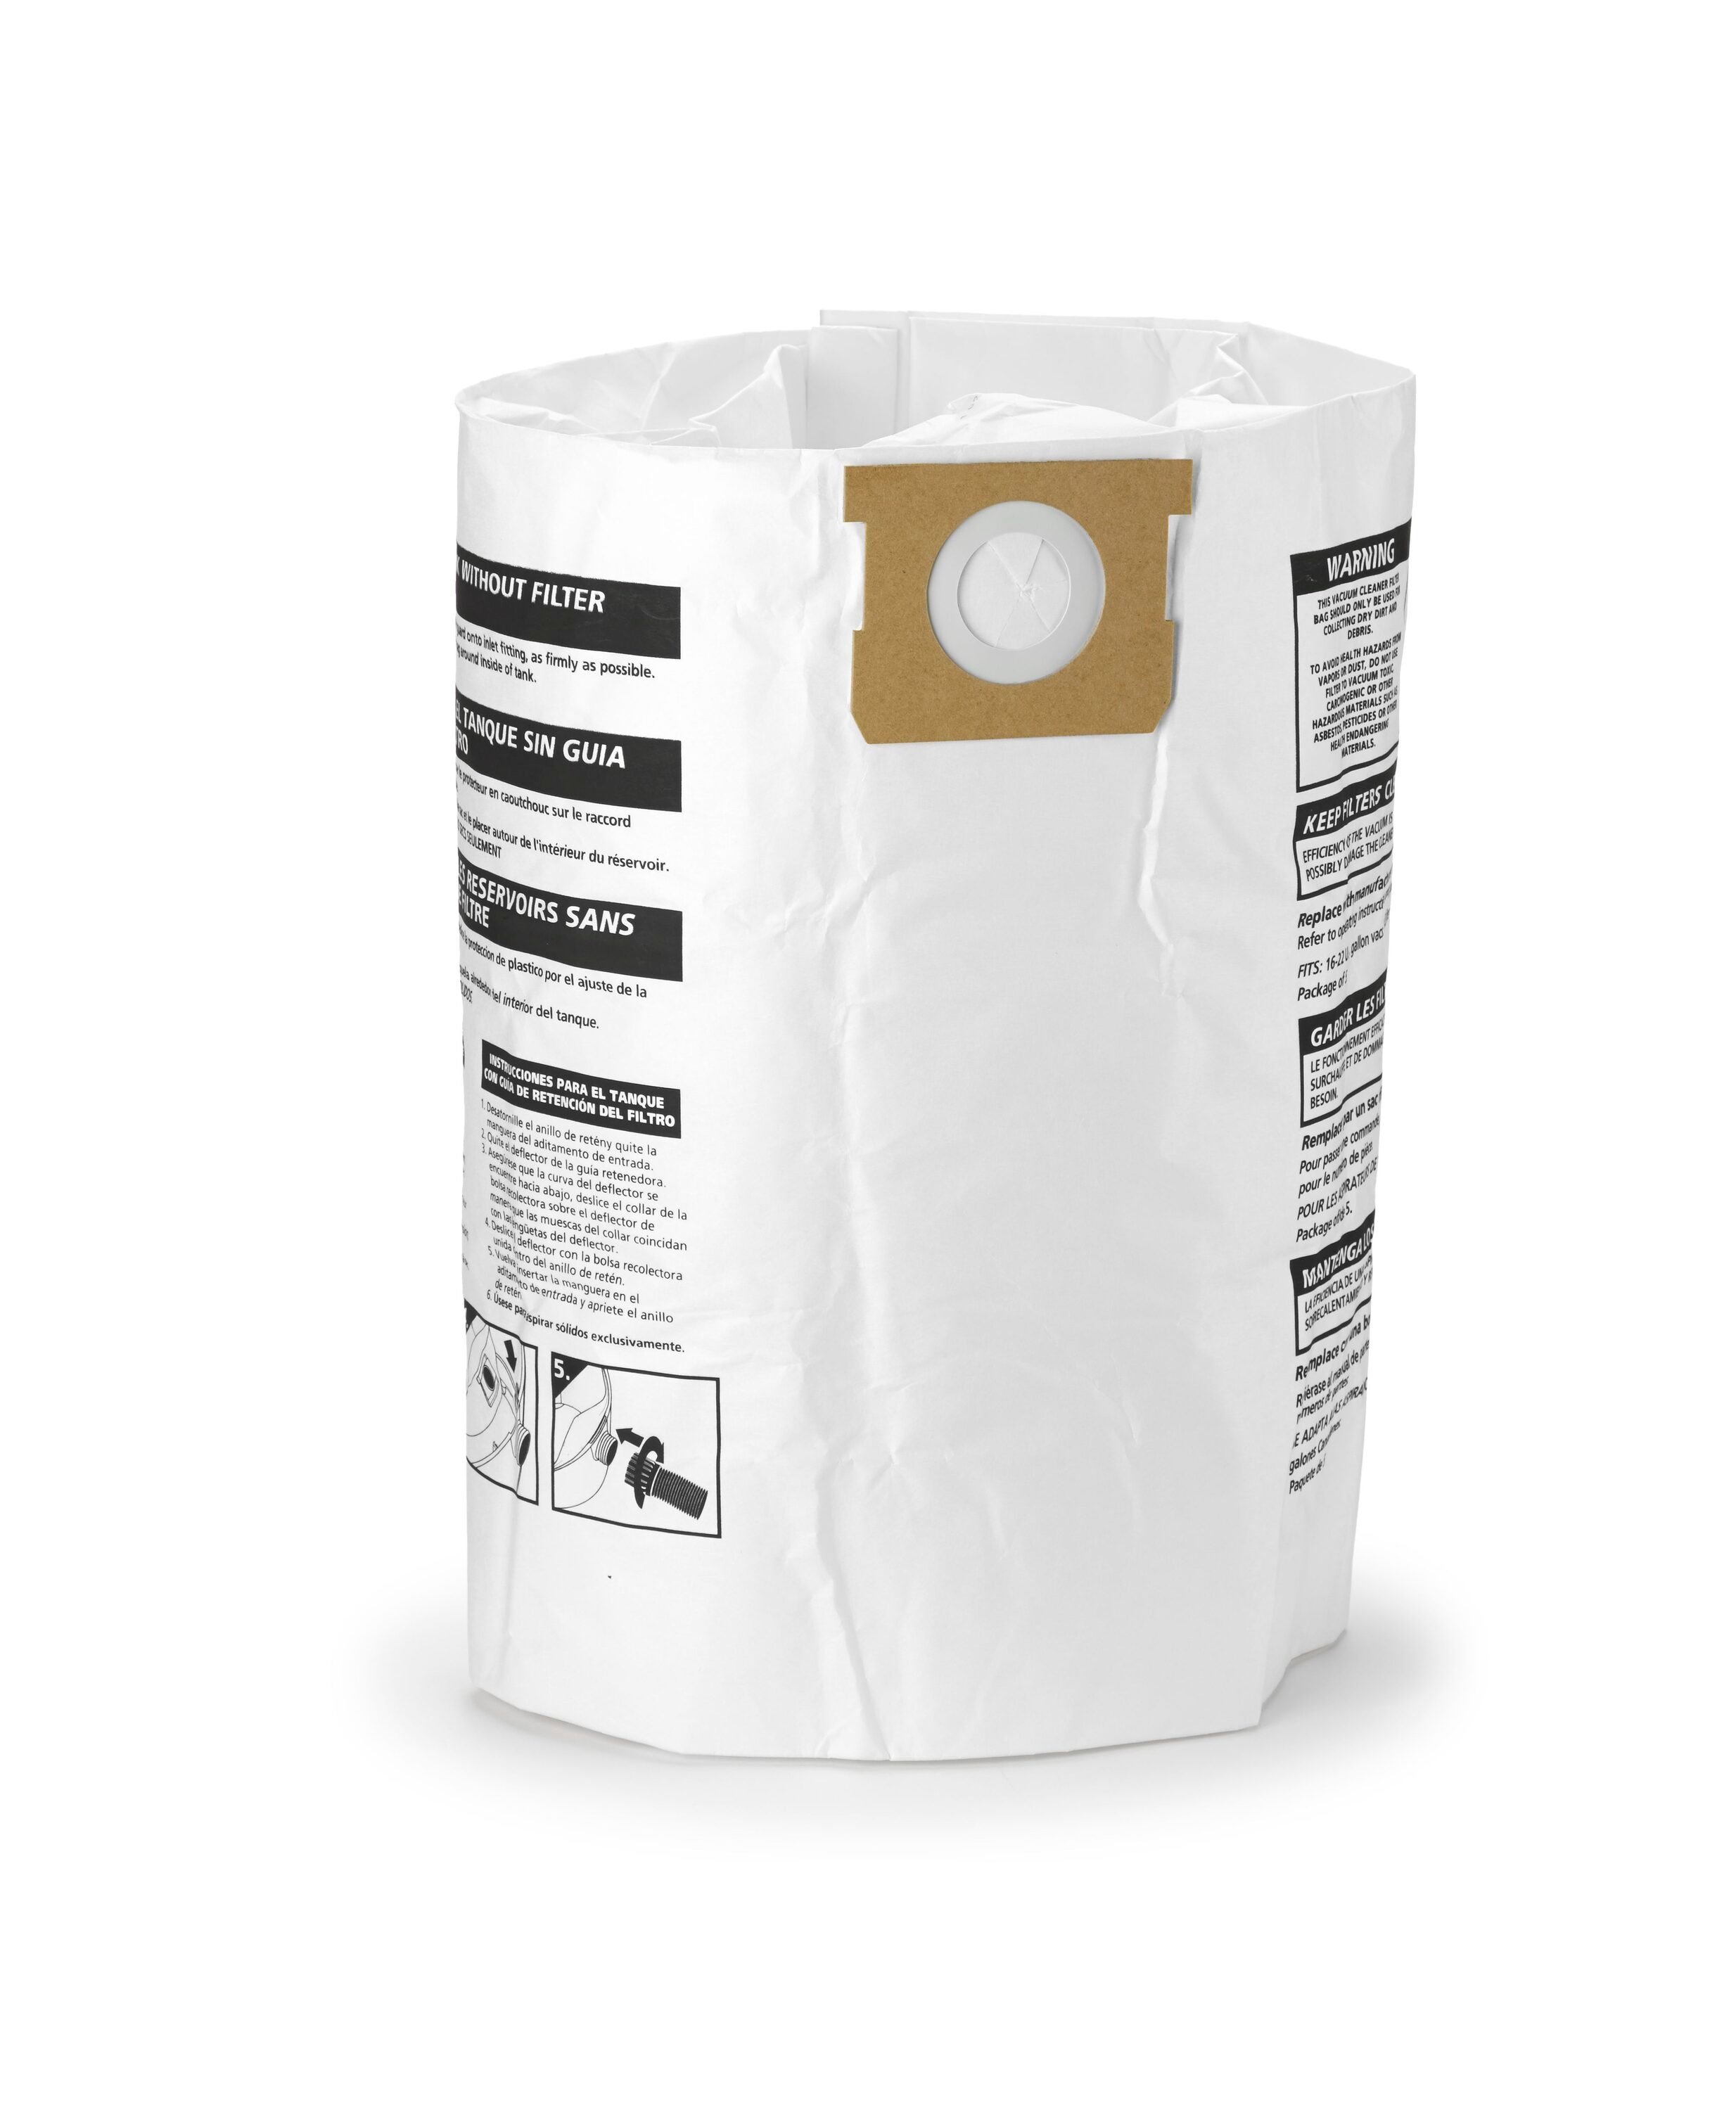 FLEX 5-Pack-Gallon Tear Resistant Wet/Dry Collection Bag in the